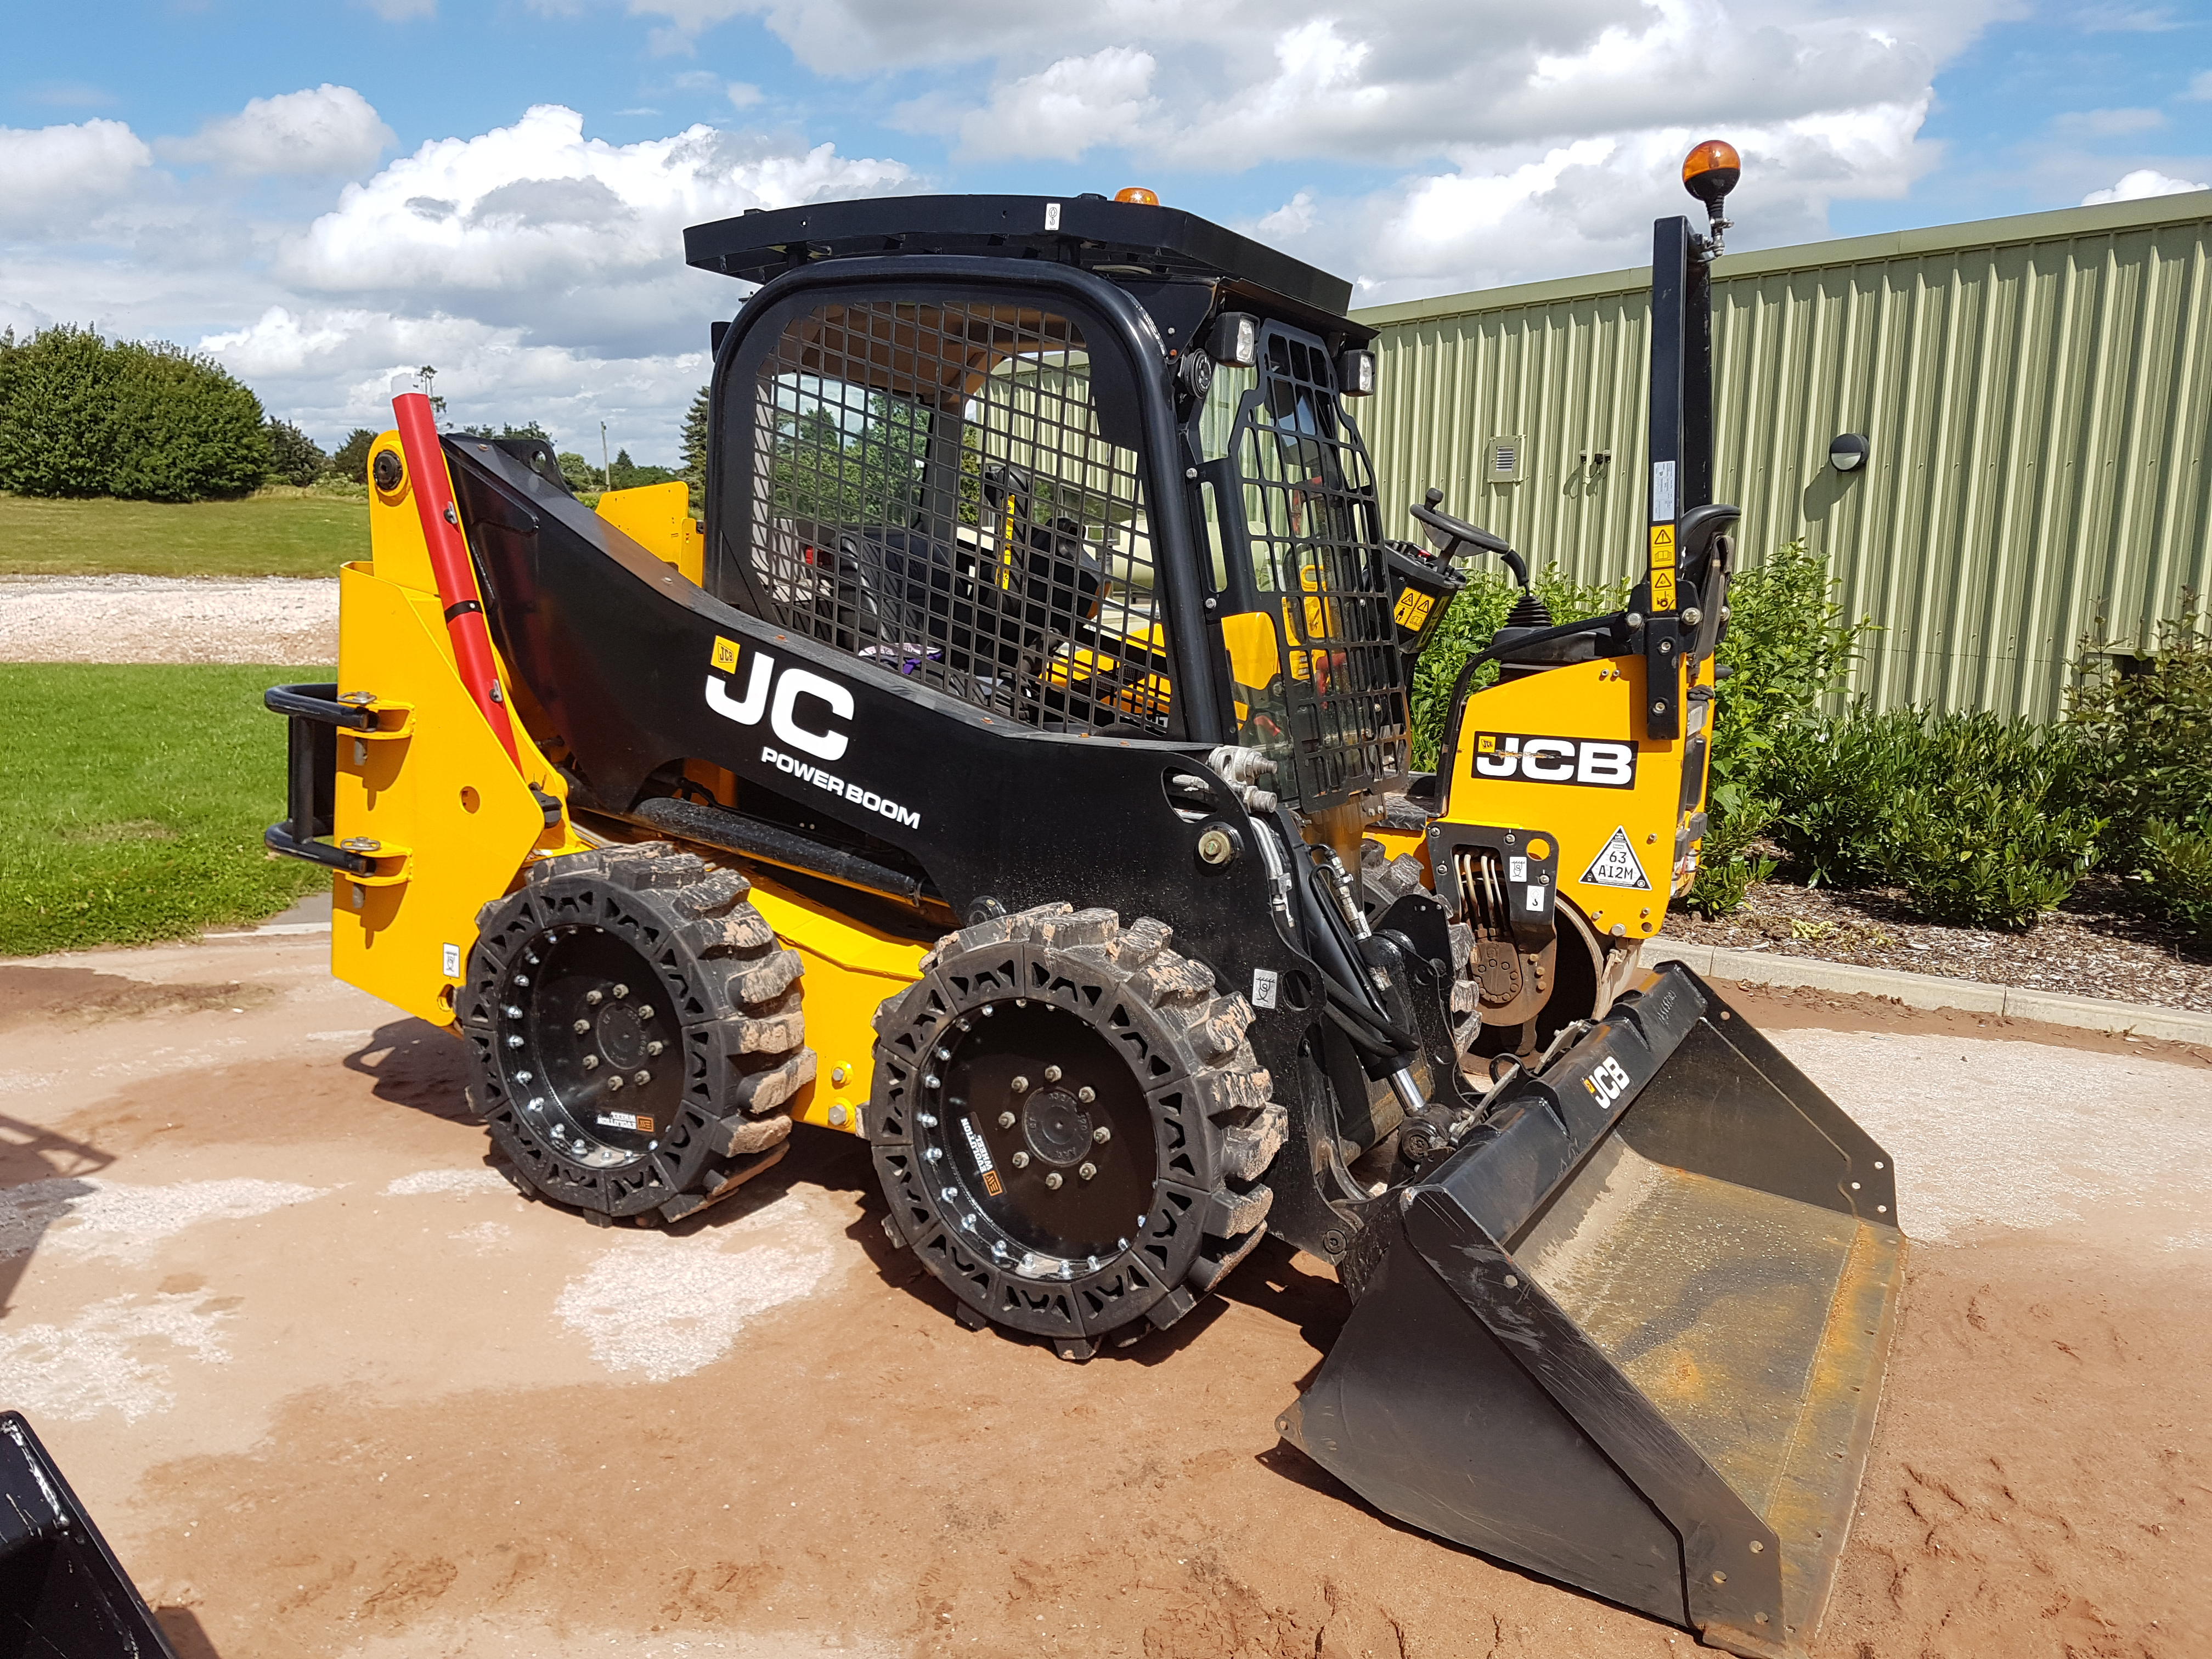 This images shows a yellow JCB Skid Steer using our Bobcat all terrain skid steer tires